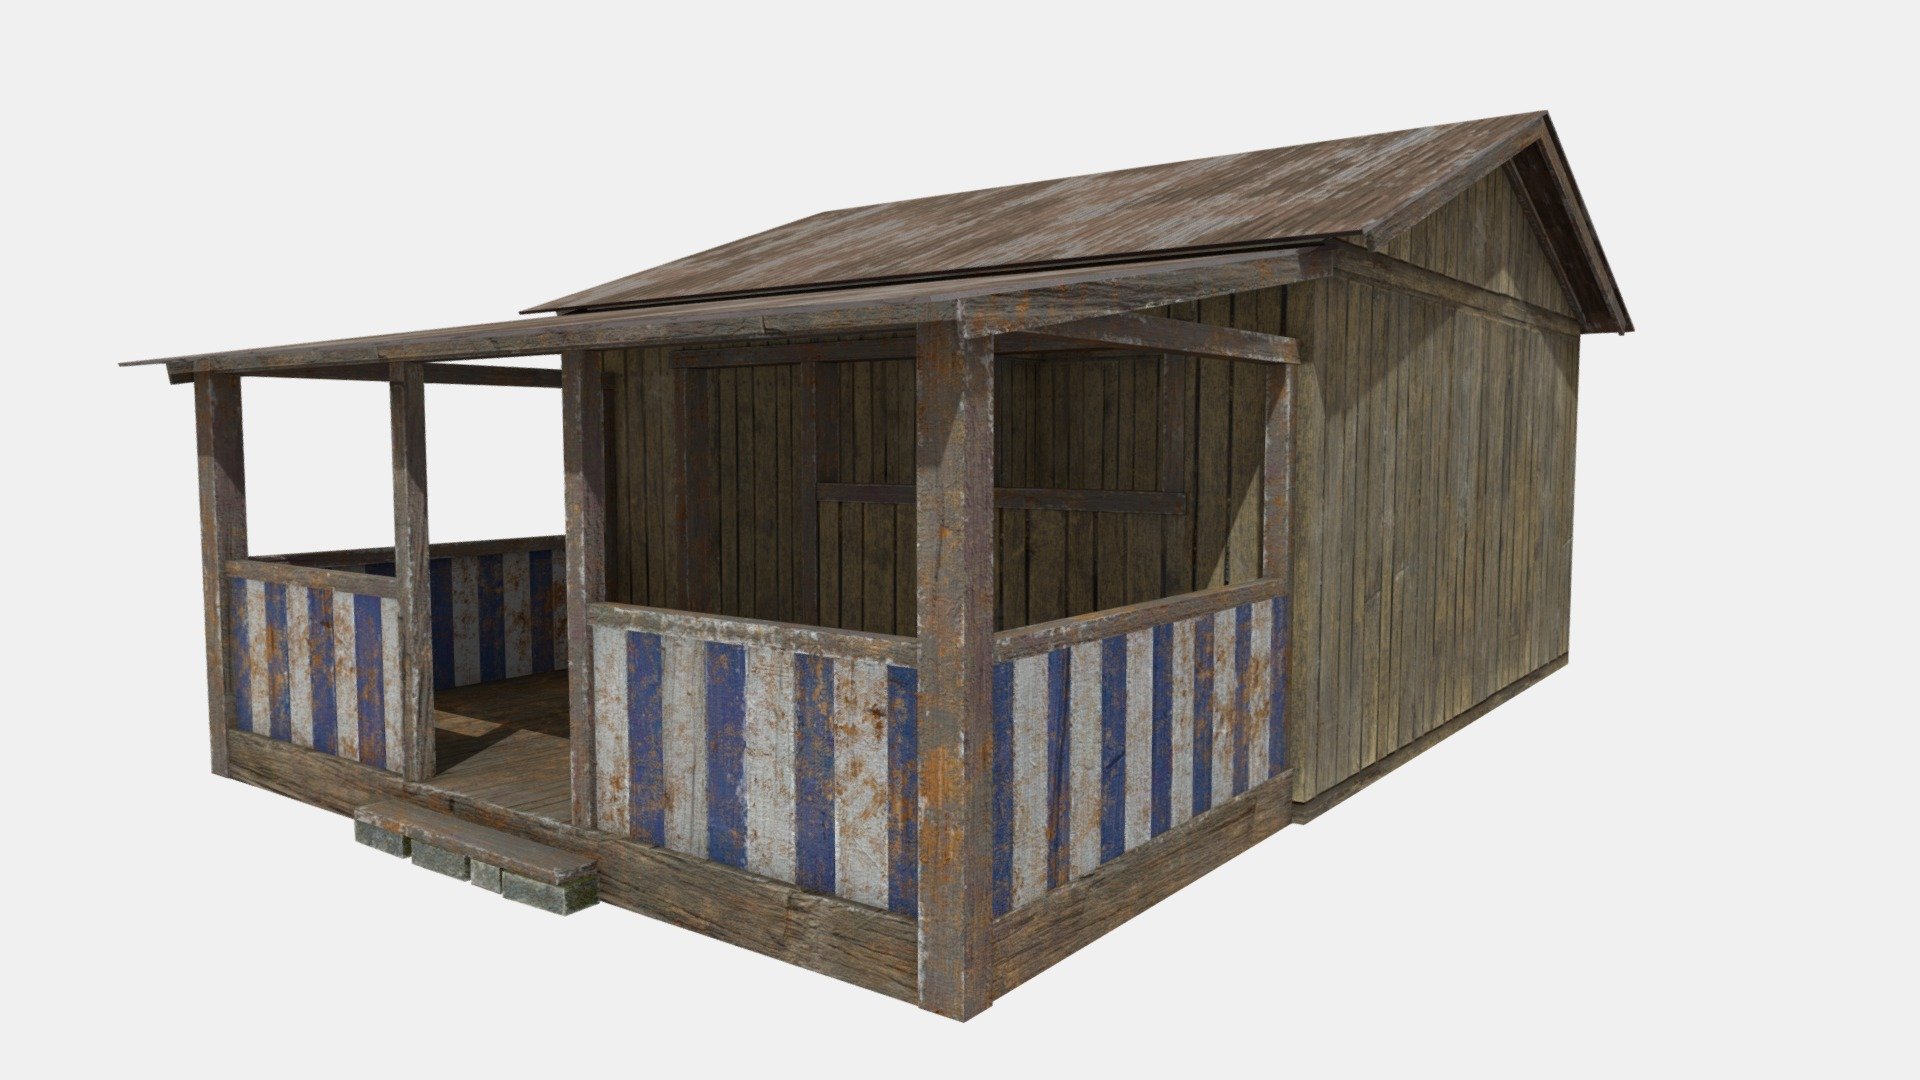 A small wooden shed with an enterable interior. Consists of two PBR materials with non-overlapping UVs . Works great in any modern game engine or for rendering purposes.  Available in:** fbx, obj, blend, dae, gltf, Unreal project and Unity package. **

Textures are in 4096x4096 resolution:




Diffuse/Base colour

Roughness

Metallic

Normal map

Ambient Occlusion

Unity and Unreal packages include drag and drop prefabs with packed textures.
Textures were created in, and exported from, Substance Painter.
Model created with, and native to, Blender 2.92 - Wooden Shed - Buy Royalty Free 3D model by HowardCoates 3d model